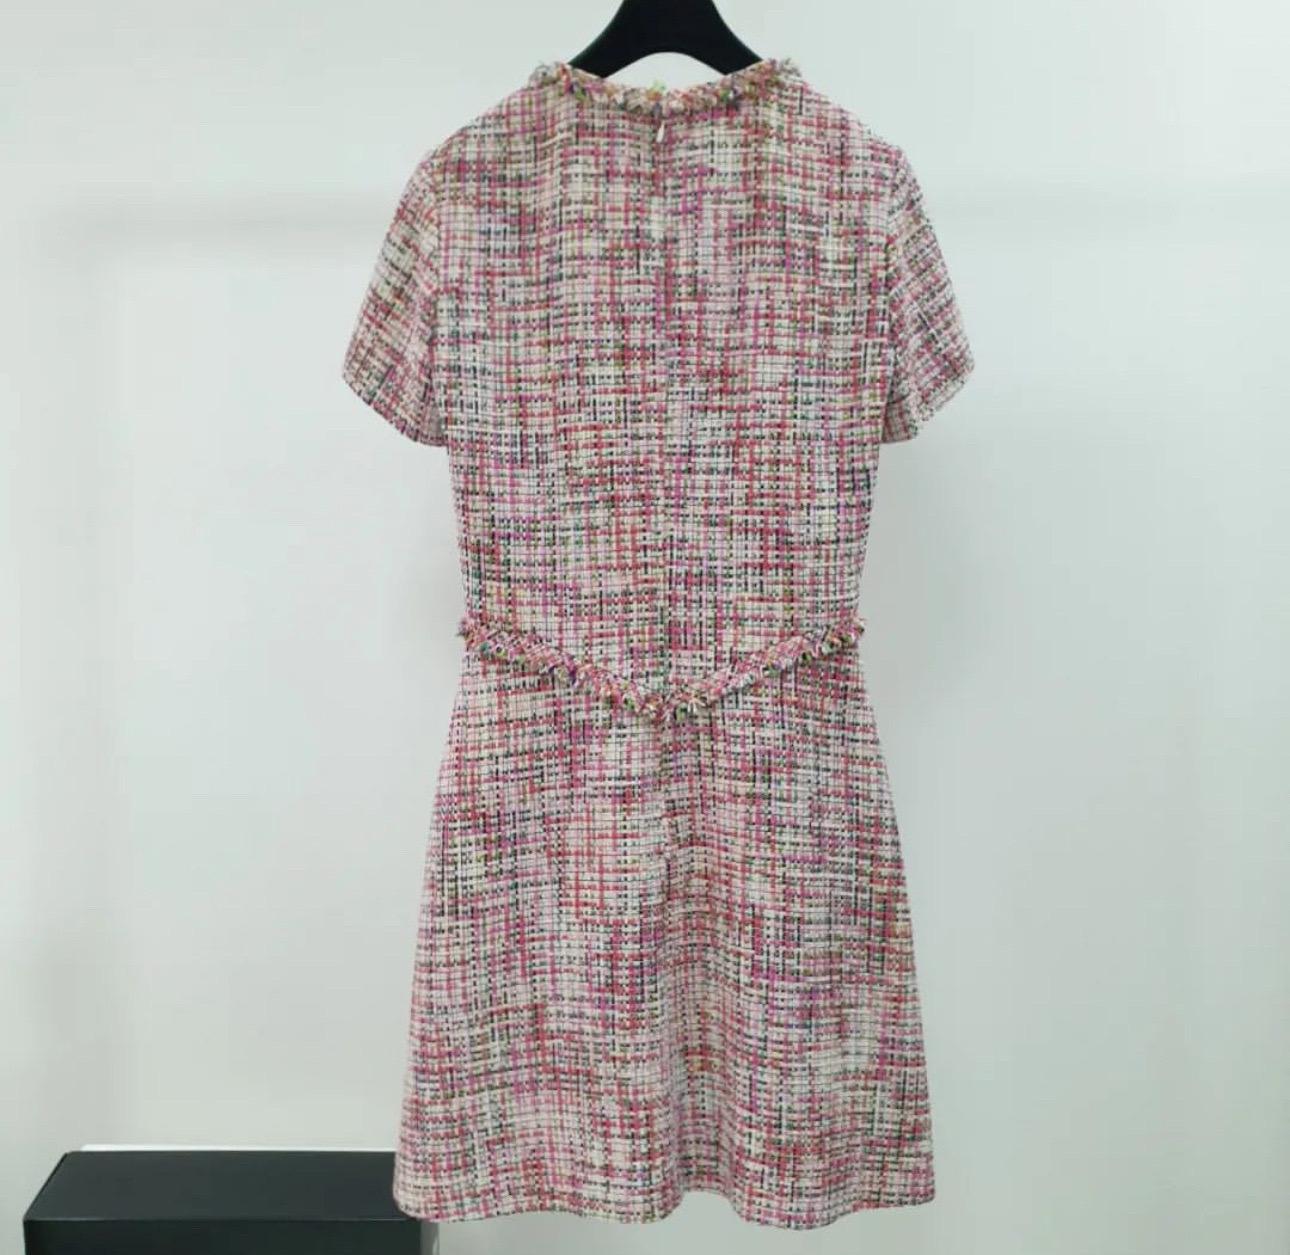 CHANEL 17P NWT $9,150
HARD TO FIND TWEED FRINGED DRESS Sz. 38 

This auction is for Chanel rare to find tweed dress from Chanel 2017 Spring collection. It is fashioned with 2 side pockets and Chanel interlocking CC logo emblem. This is new with tag.